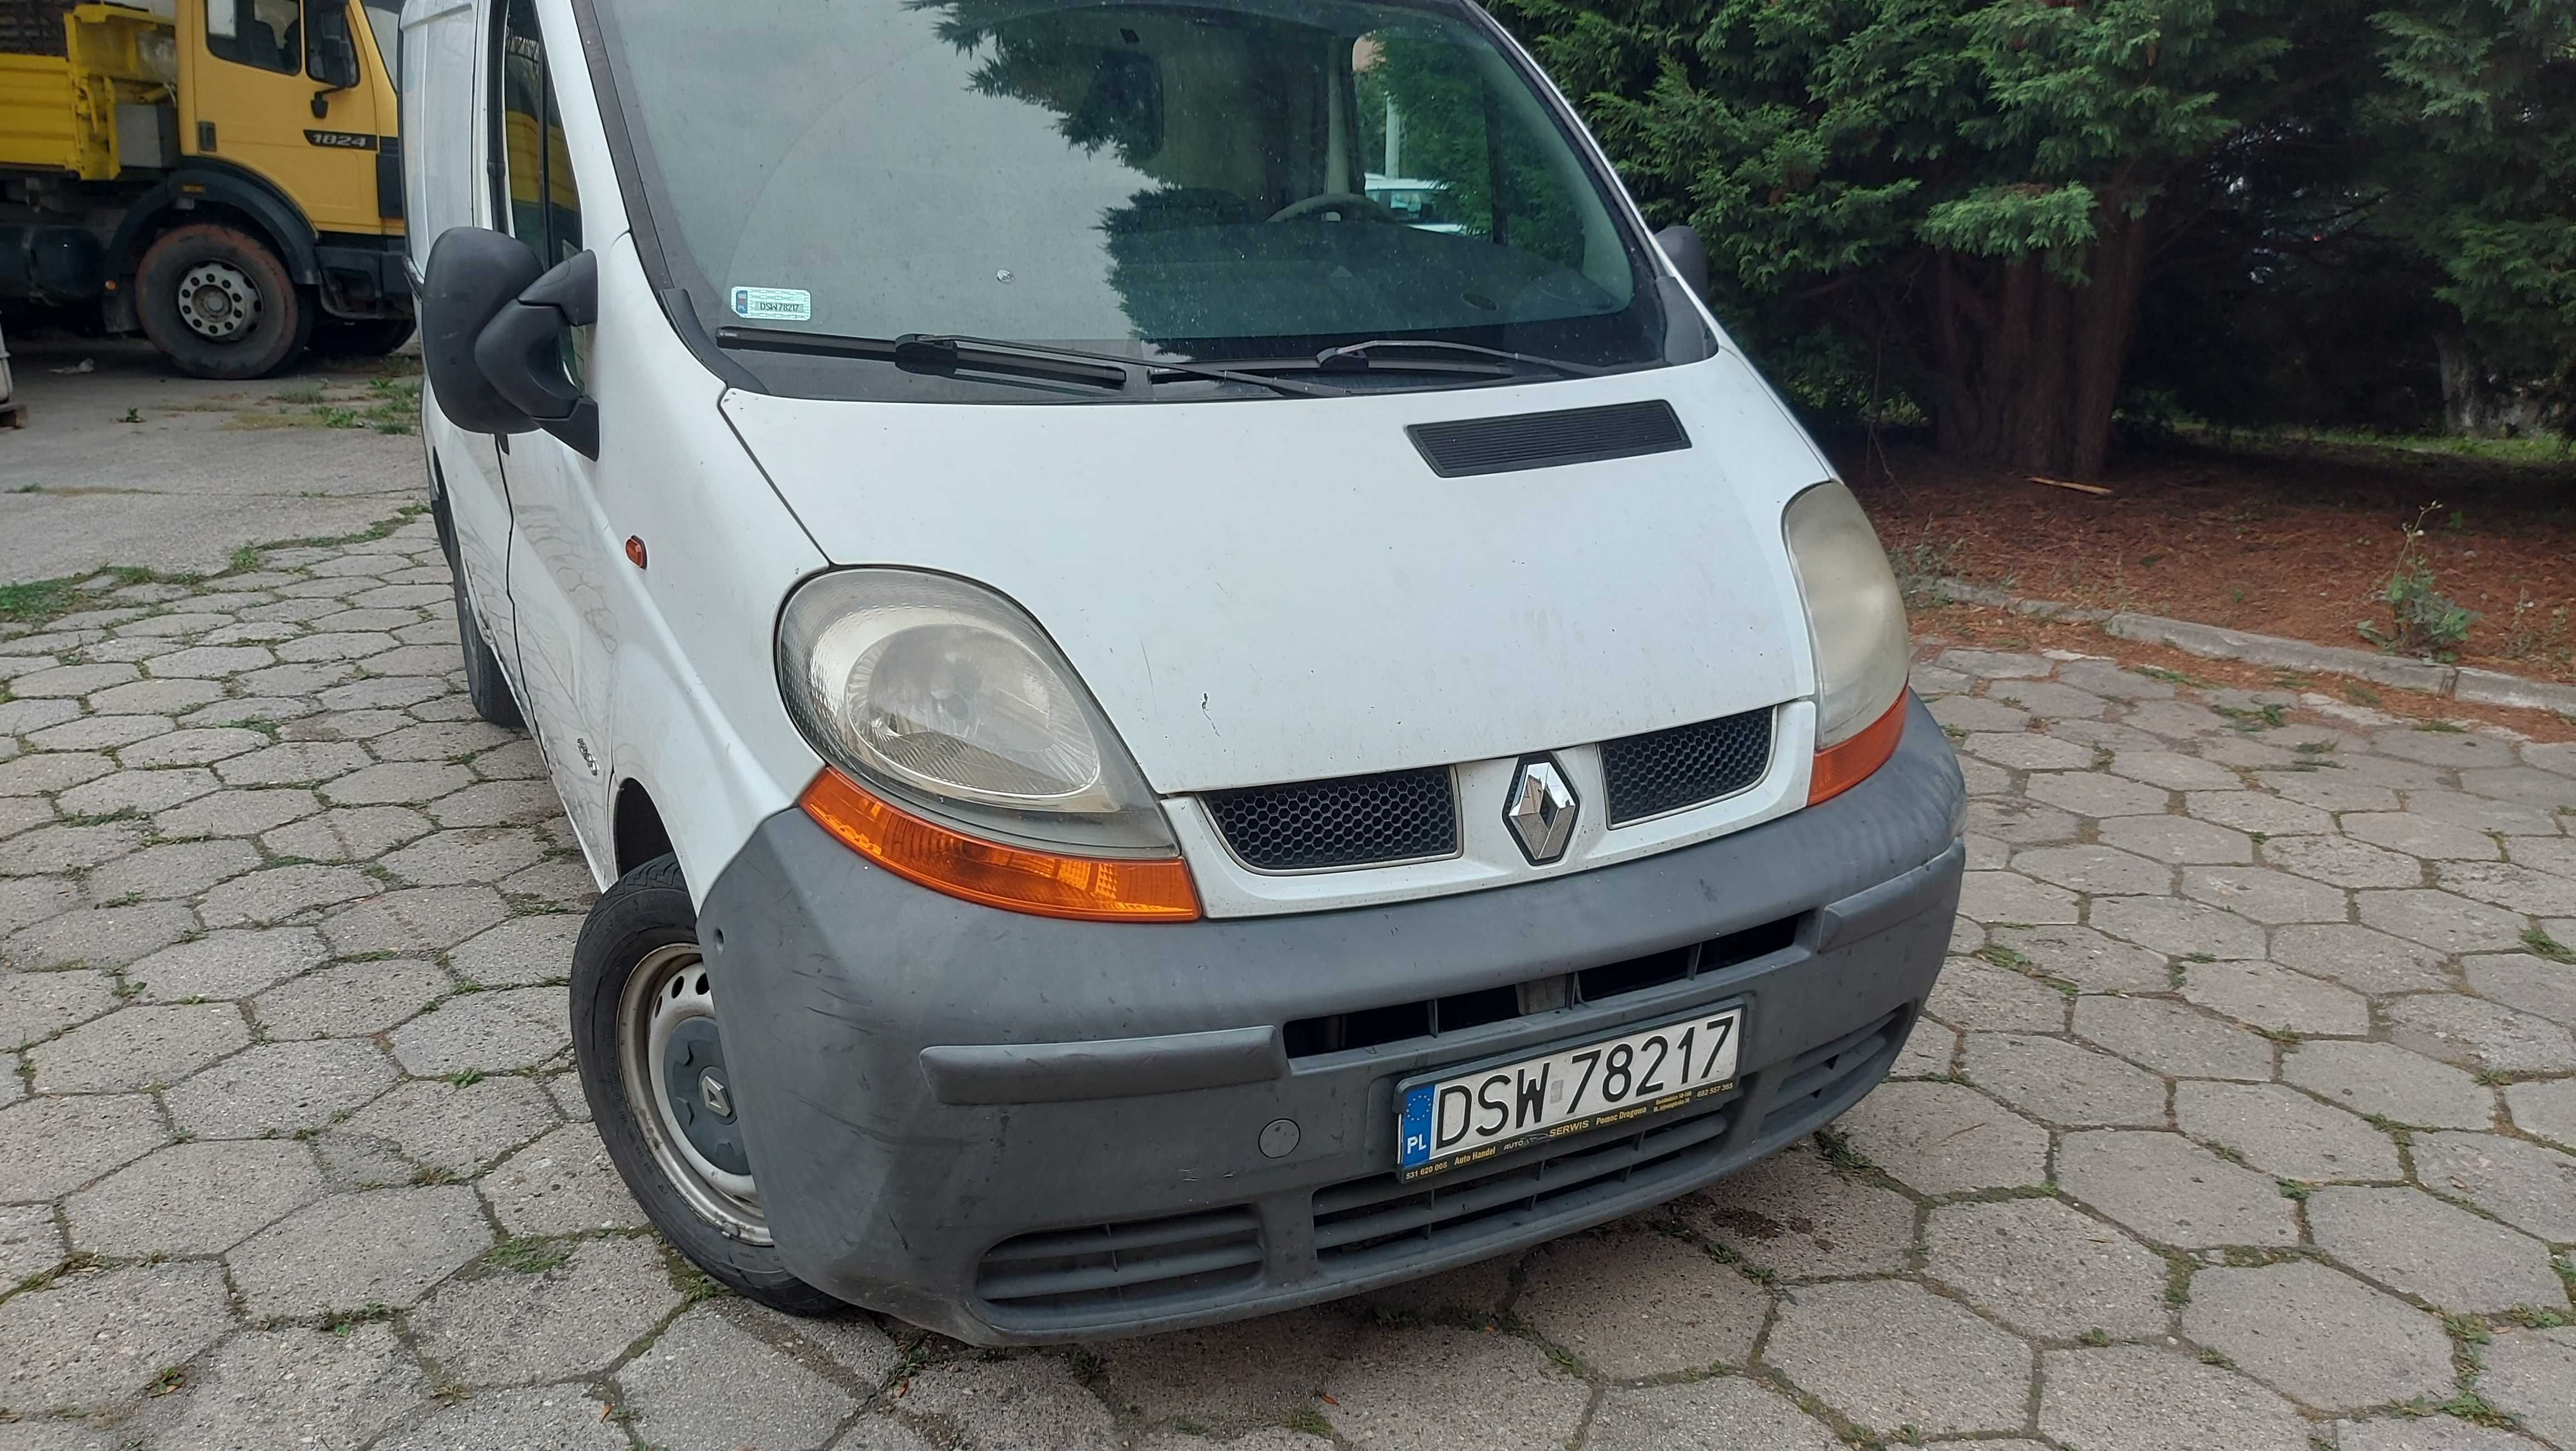 Renault trafic 1.9 DCI